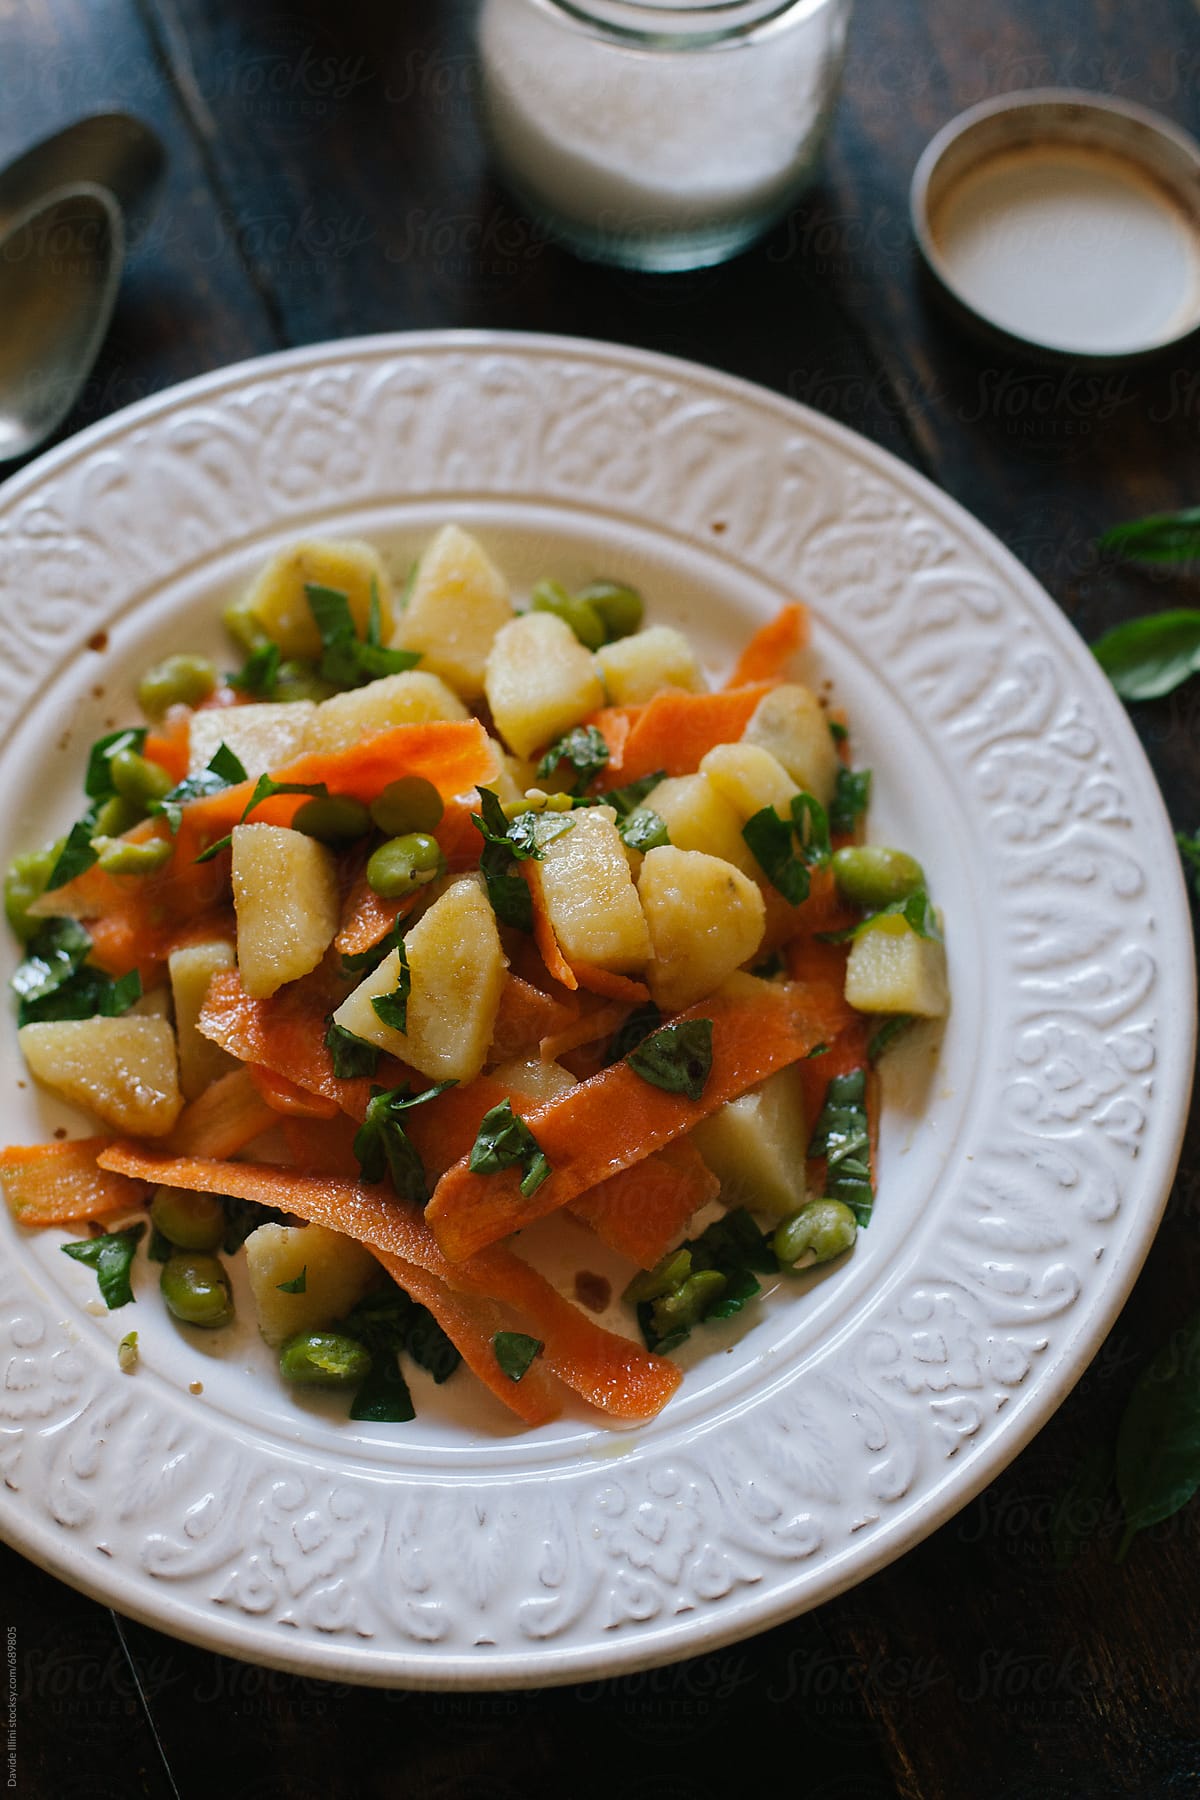 Vegan salad with potatoes green beans and carrots.